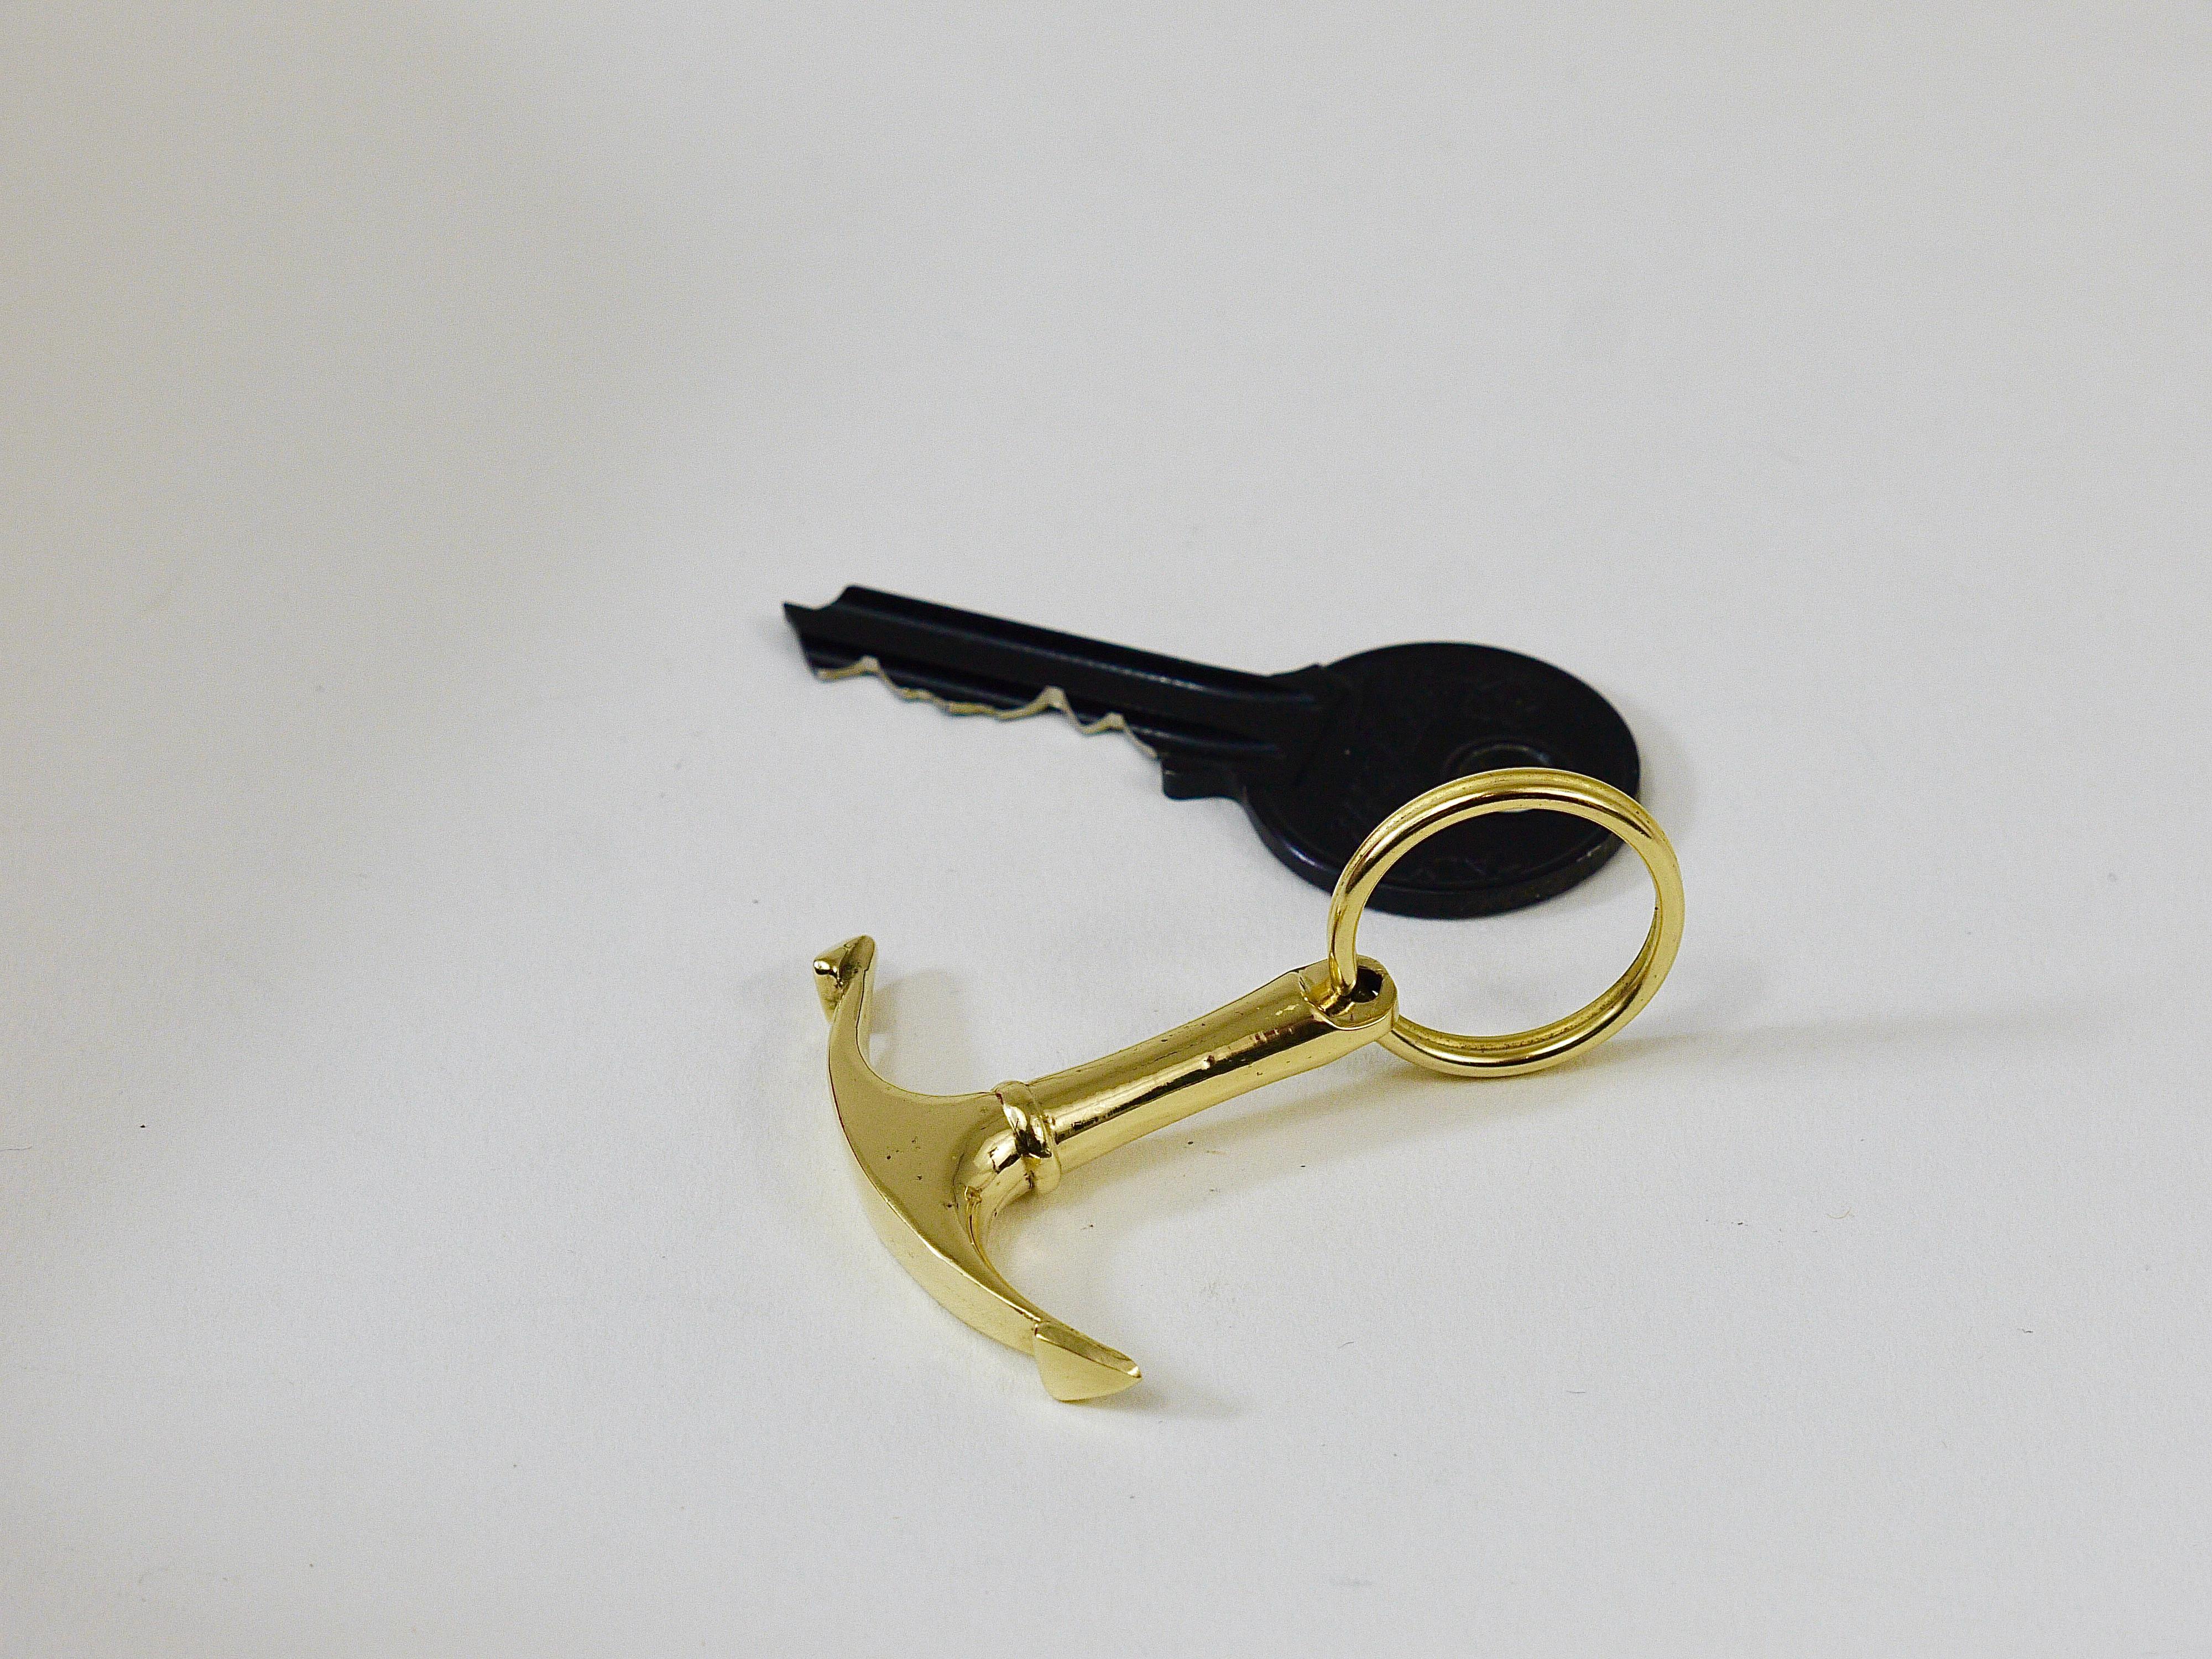 Mid-Century Modern Carl Auböck Handcrafted Midcentury Brass Anchor Figurine Key Ring Chain Holder For Sale